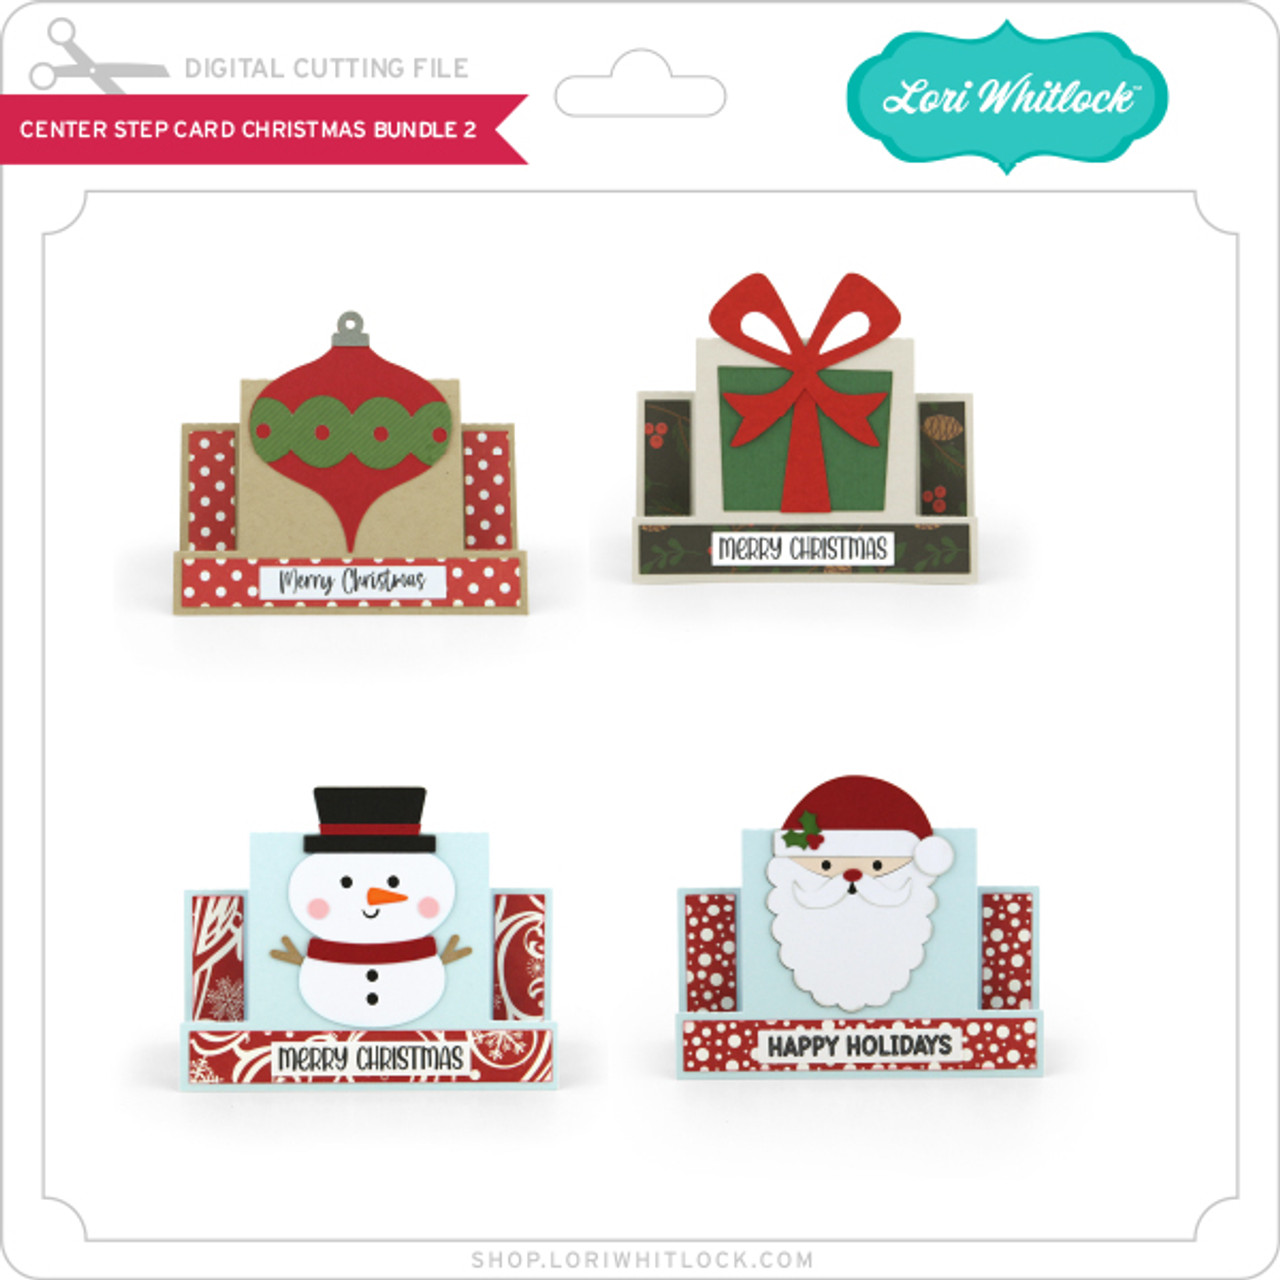 Christmas Ornament Gift Card Holders - Lori Whitlock's SVG Shop